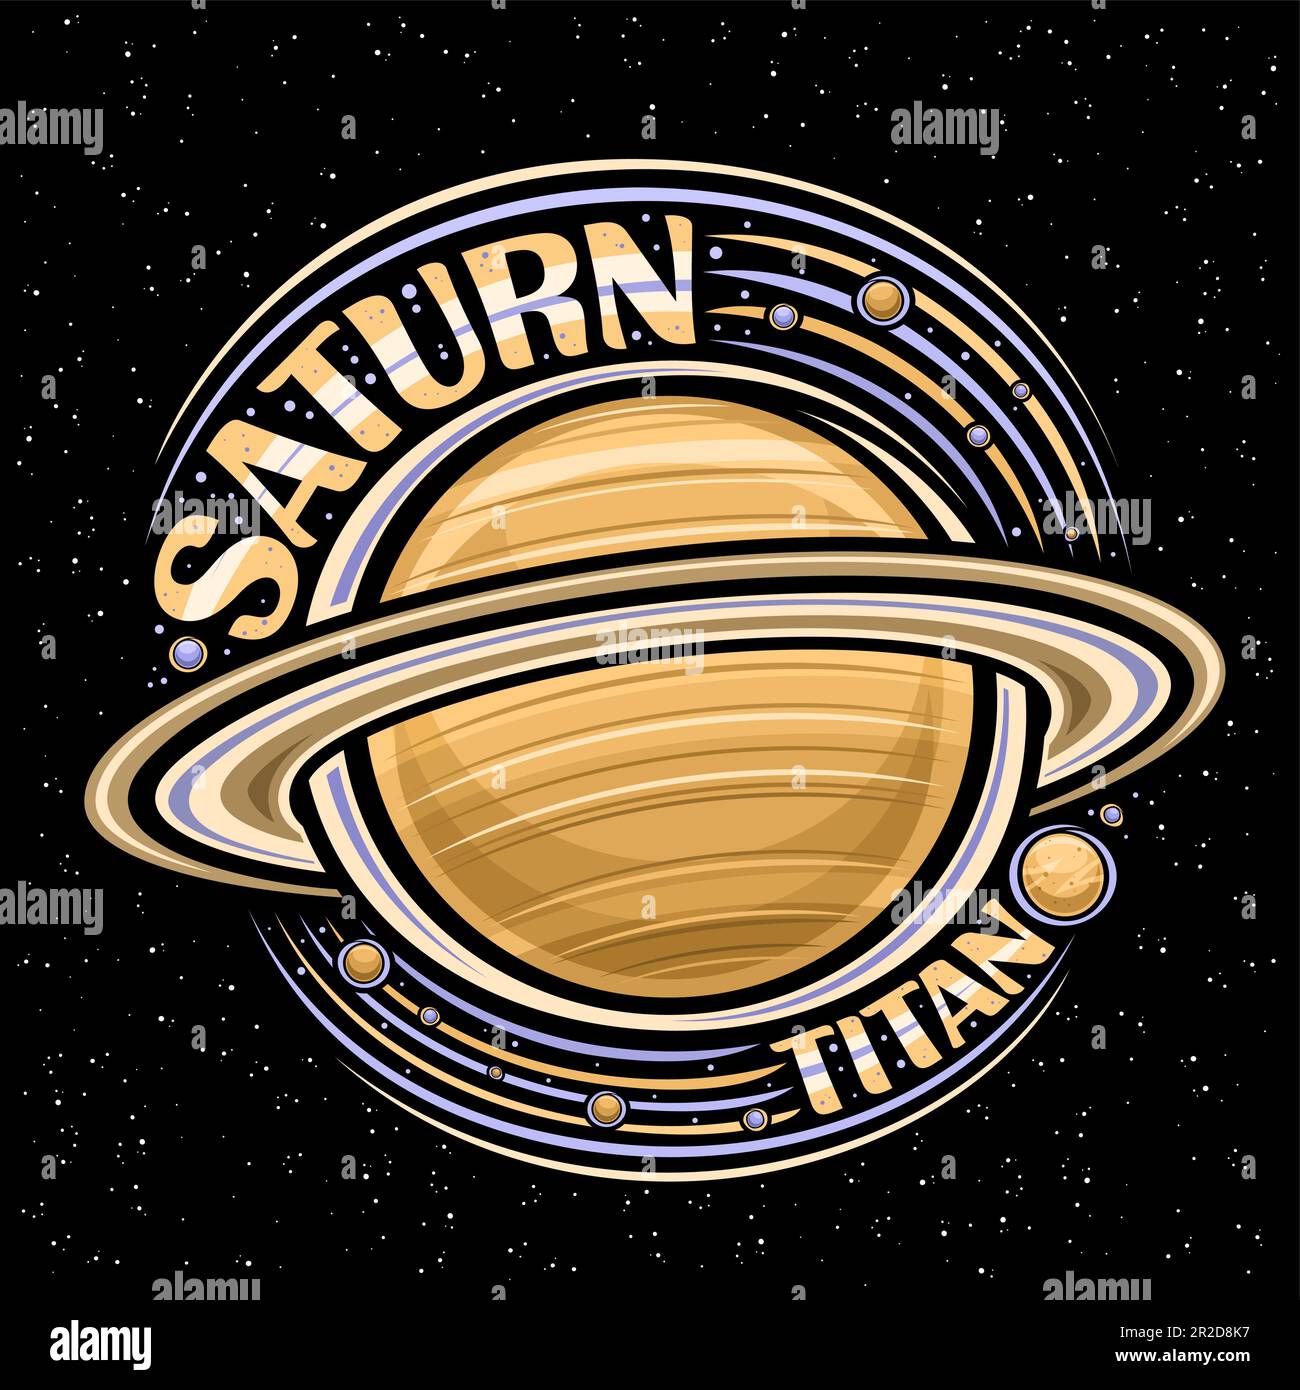 Vector logo for Saturn, decorative fantasy print with rotating planet saturn and many moons, gas windy surface, round cosmo tag with unique lettering Stock Vector